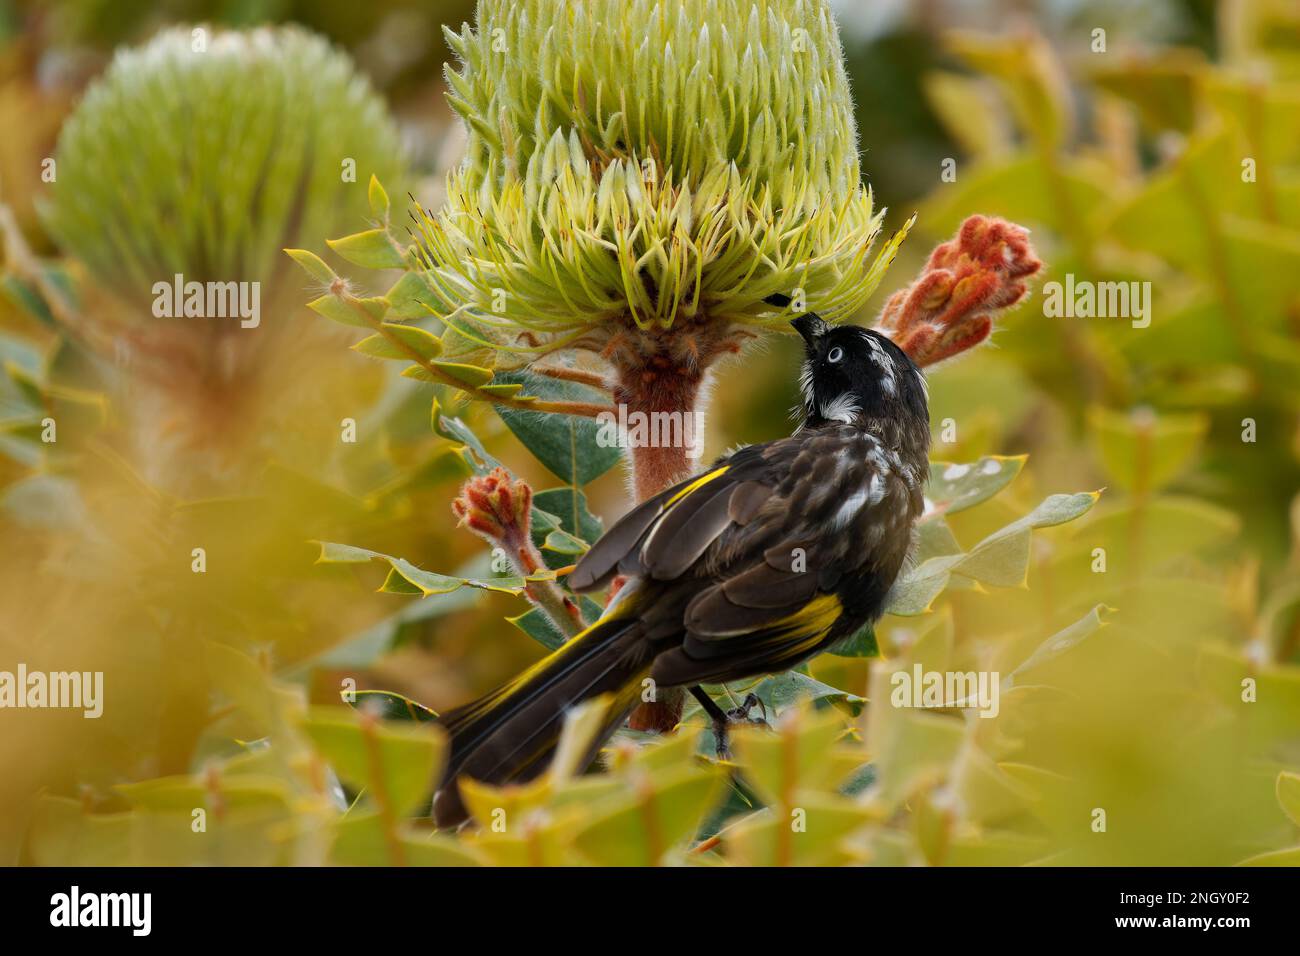 New Holland Honeyeater - Phylidonyris novaehollandiae - australian bird with yellow color in the wings feeding on nectar on the yellow banksia blossom Stock Photo